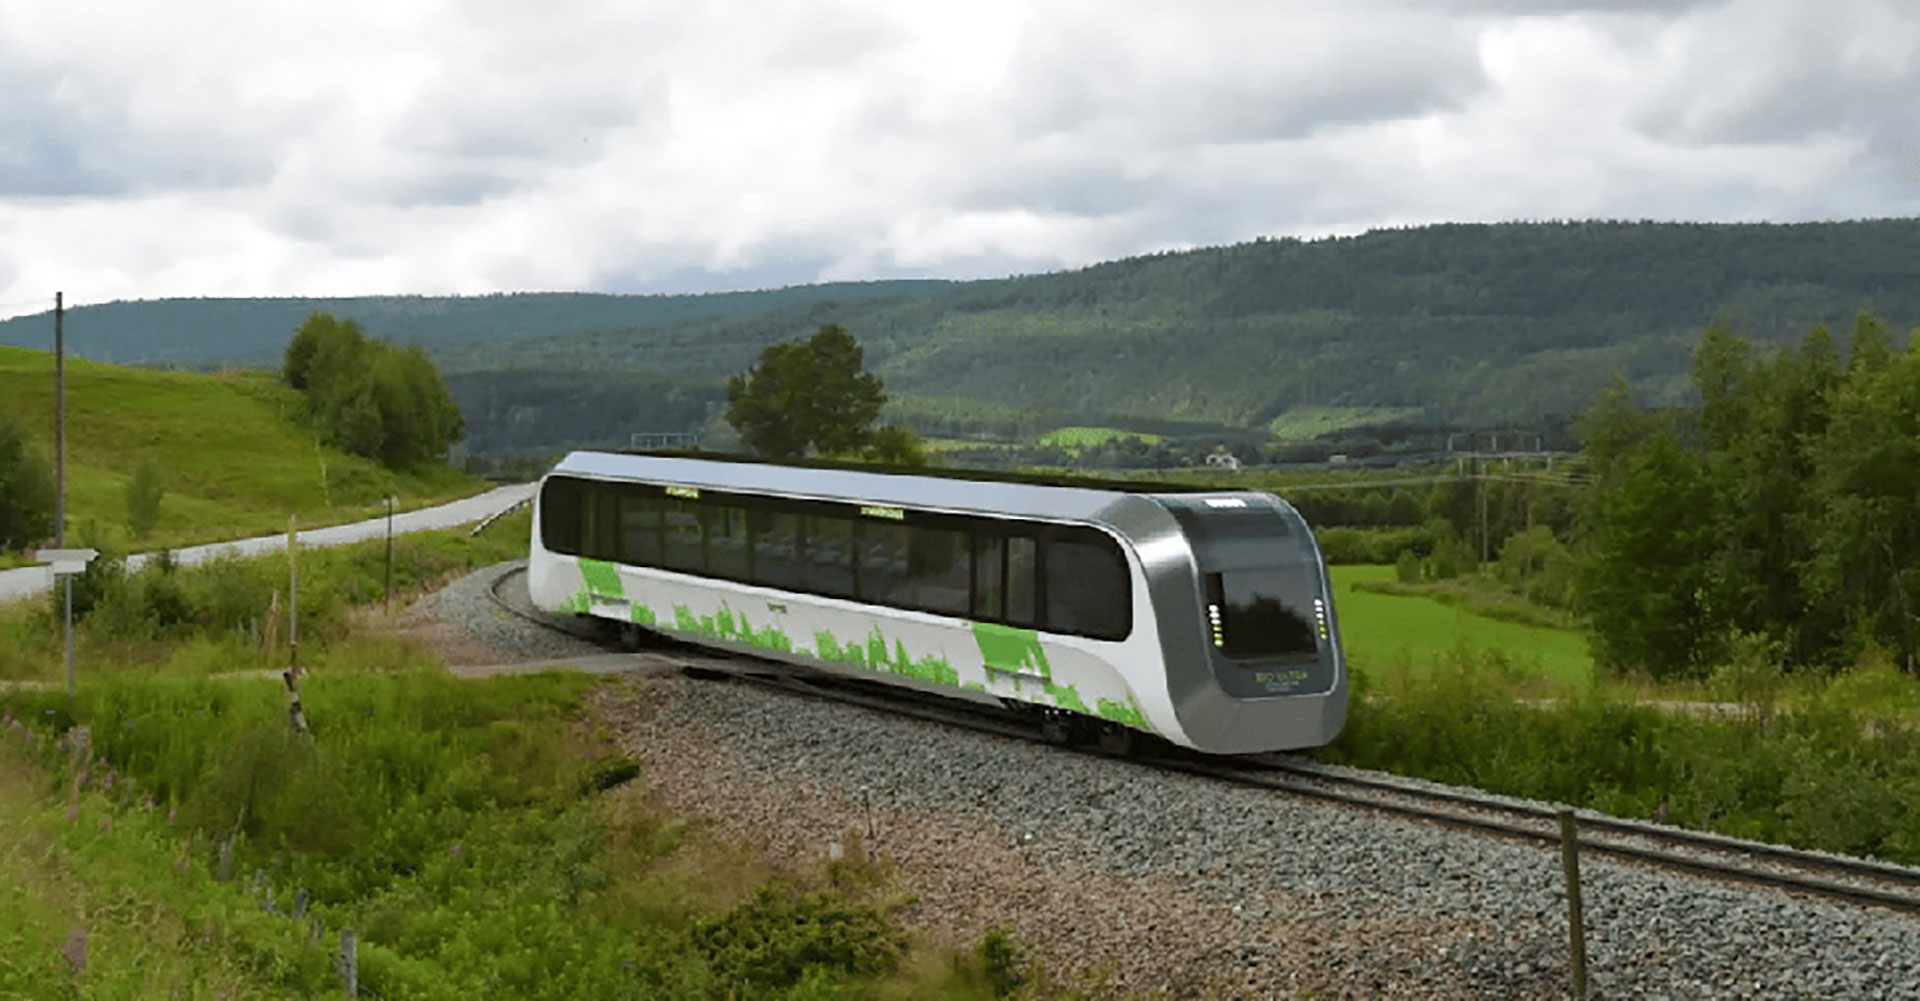 BCIMO supports Ultra Light Rail Partners Ltd (ULRP) to progress their vision